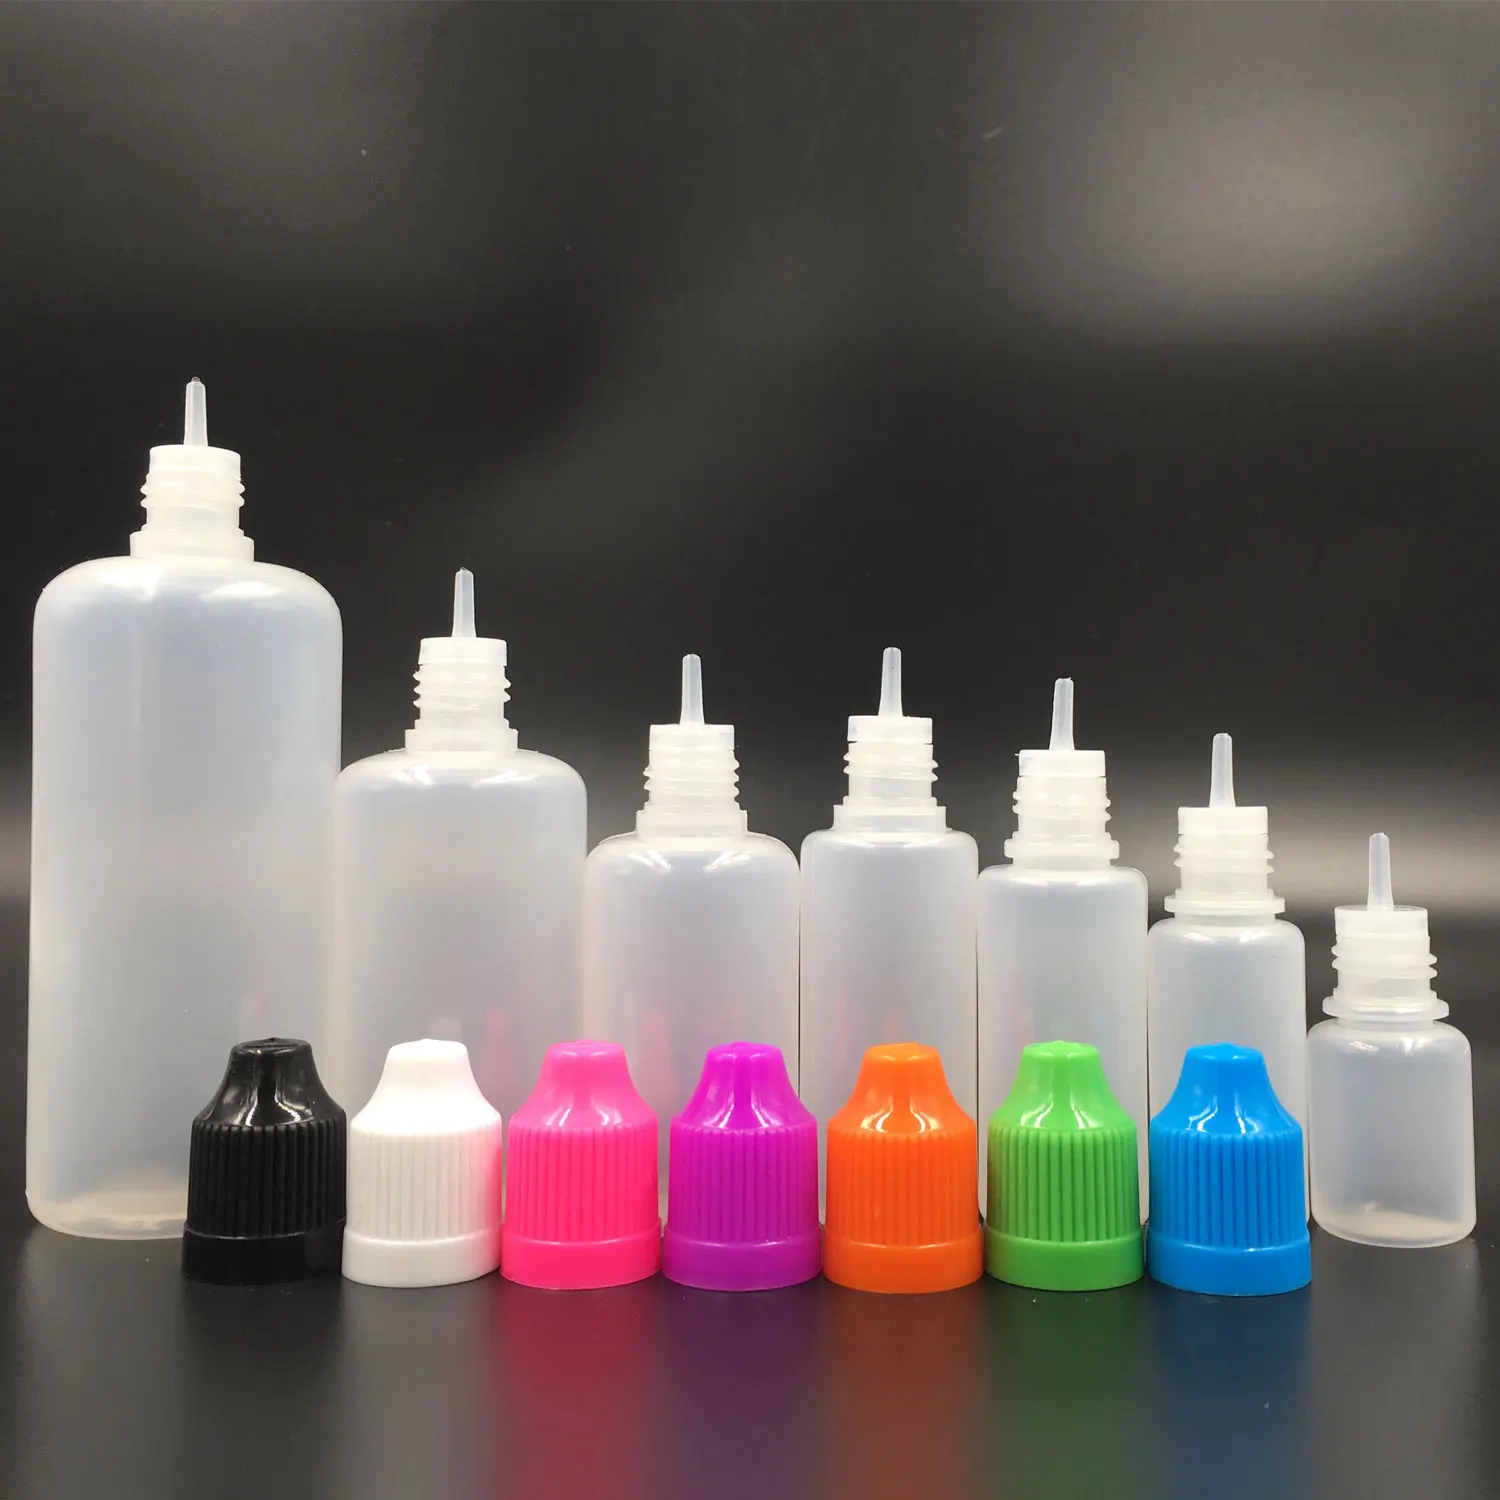 10pcs 5ml-120ml Empty Soft LDPE Dropper Bottles Plastic Containers for E Liquid Vape Bottle with Mixed Caps Lid Plugs mofii 666 keyboard mouse combo wireless 2 4g mixed color 110 key keyboard mouse set with round punk keycaps for girl green